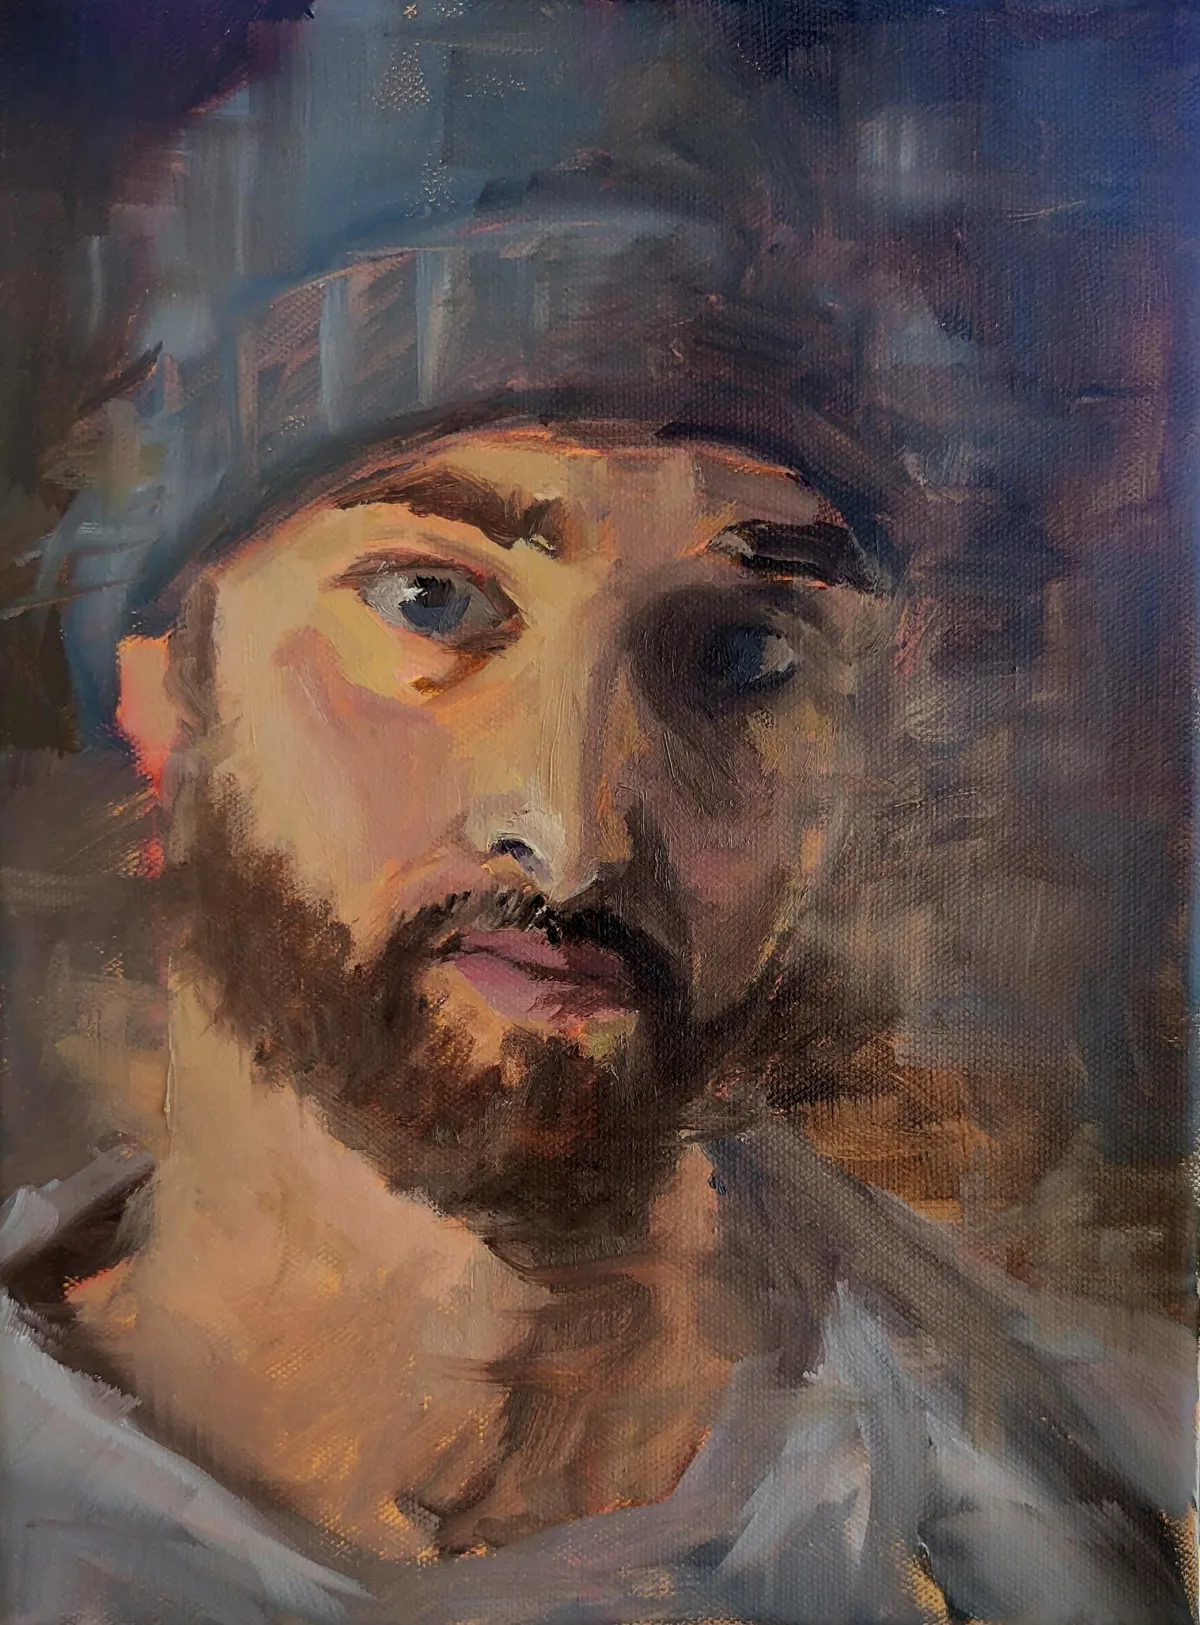 A portrait painting of a scruffy man with a serious and sombre expression 